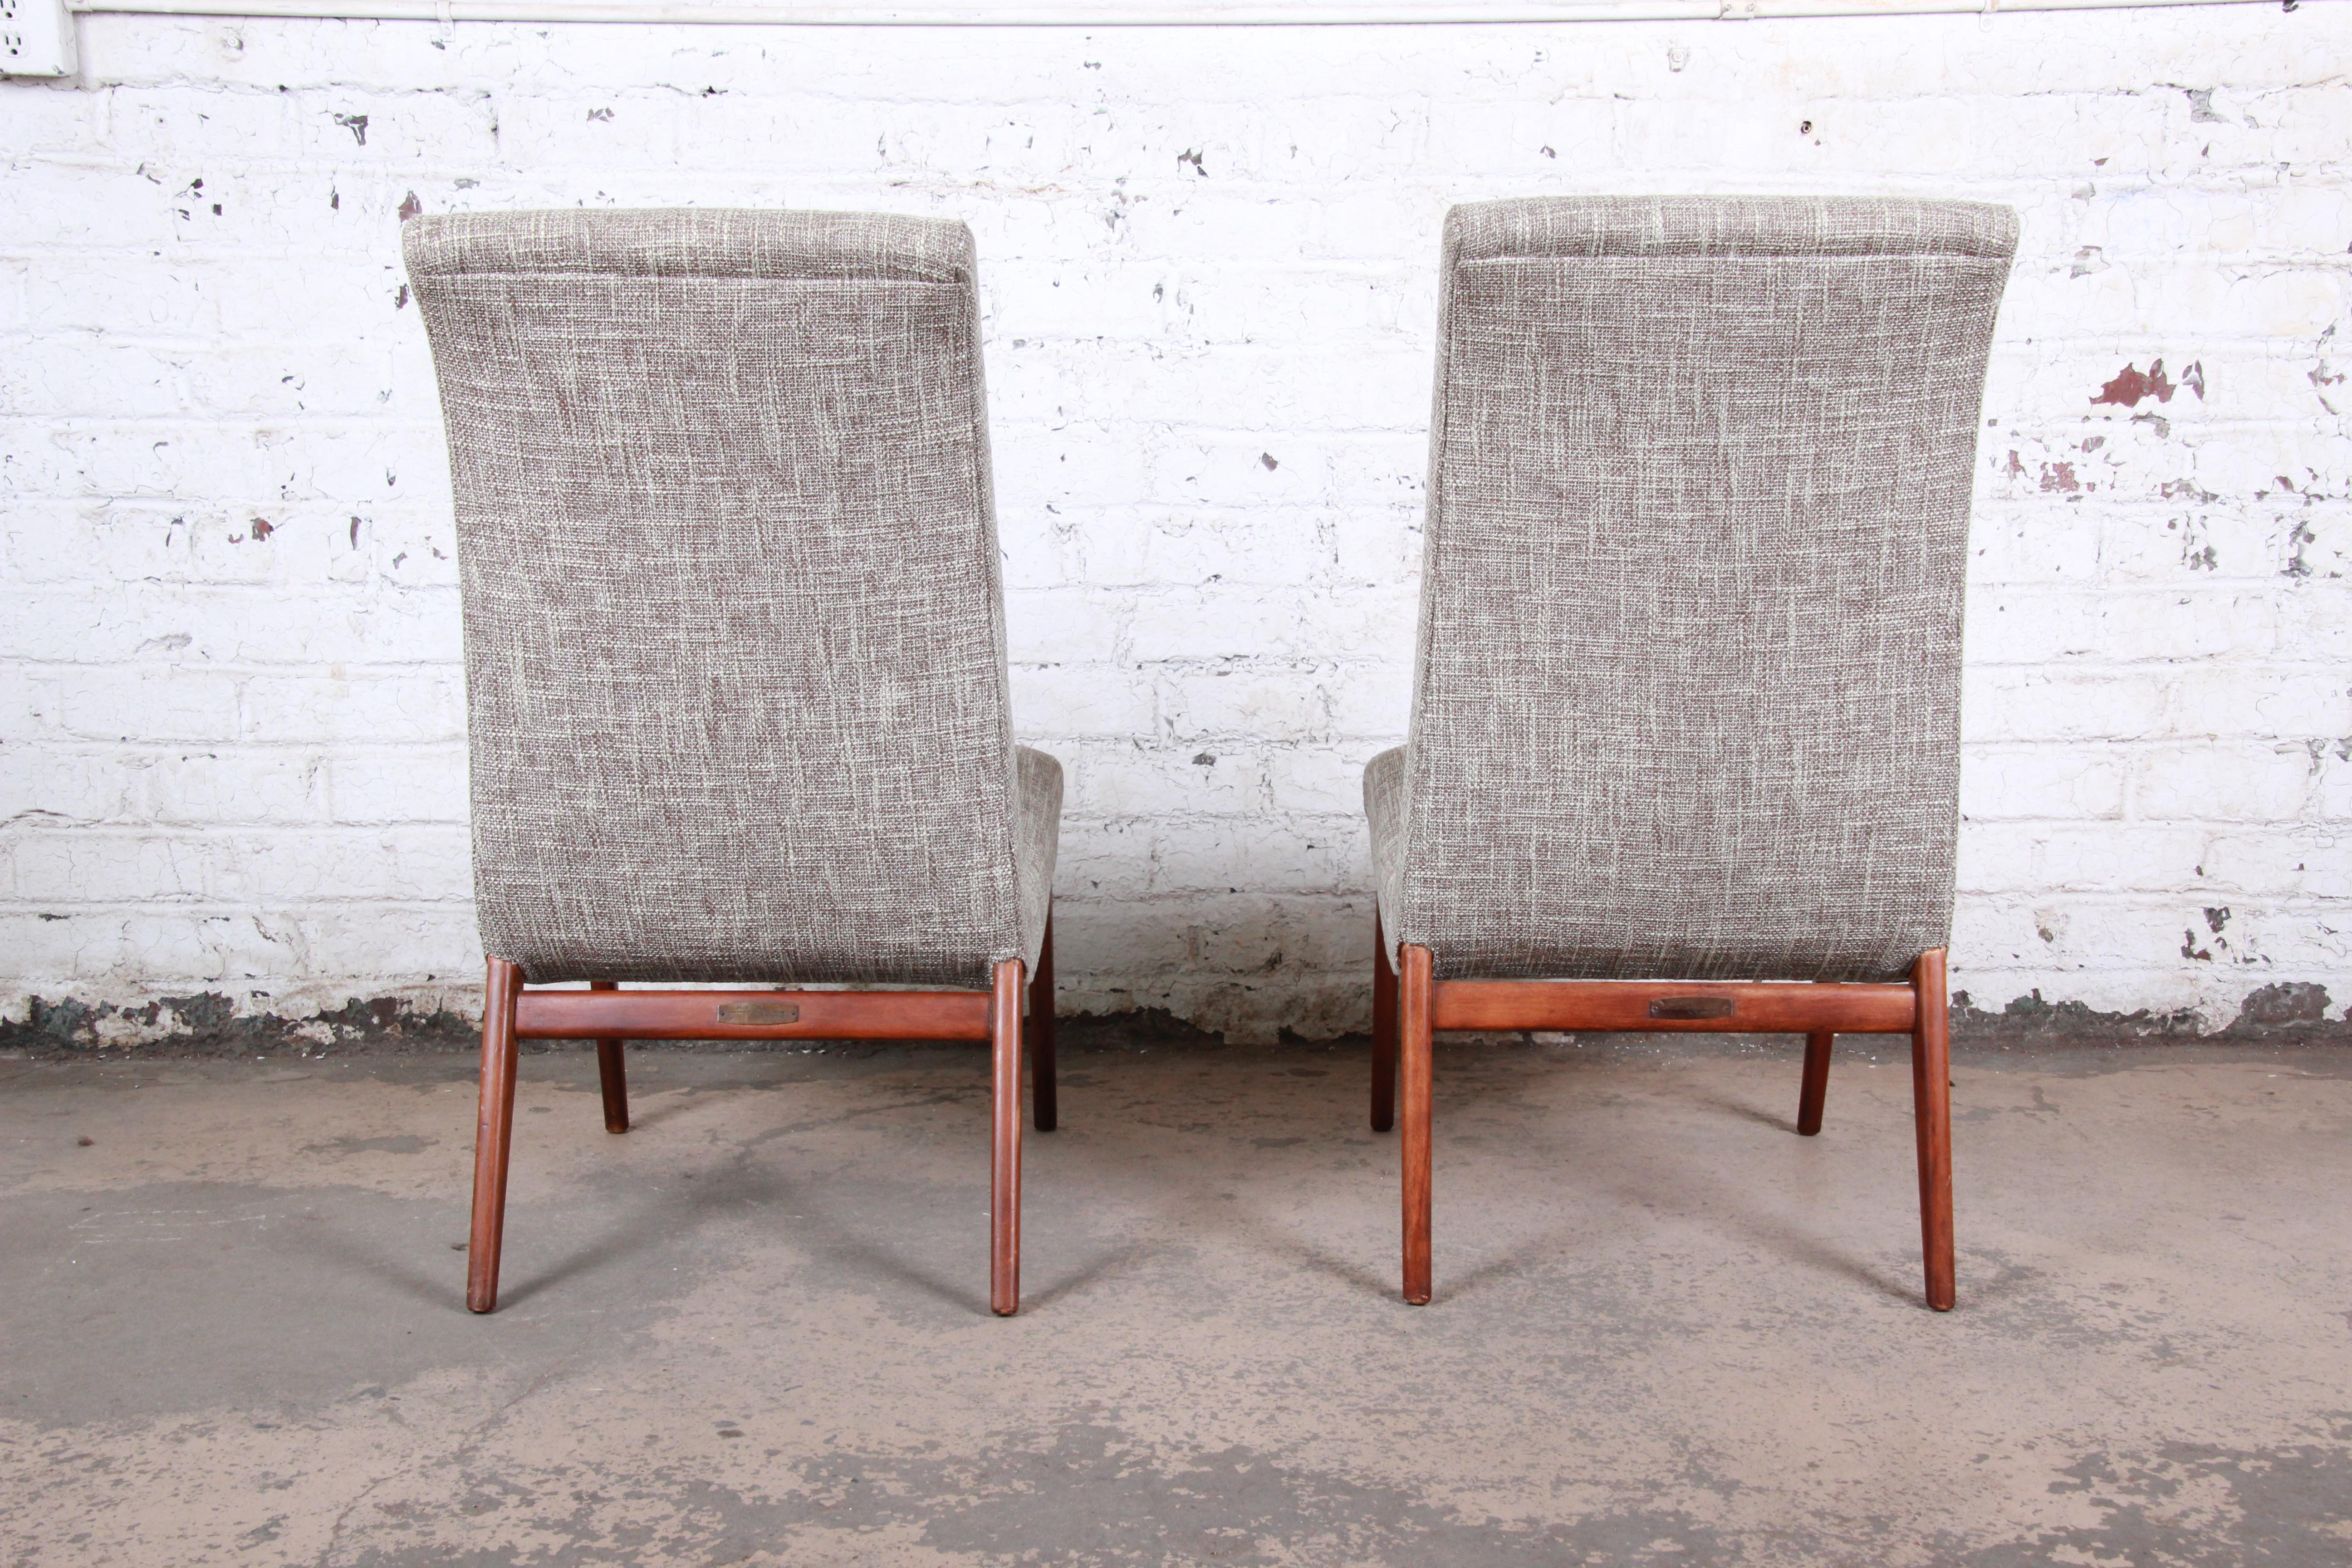 Fabric Norman Bel Geddes Mid-Century Modern Slipper Chairs, Newly Reupholstered